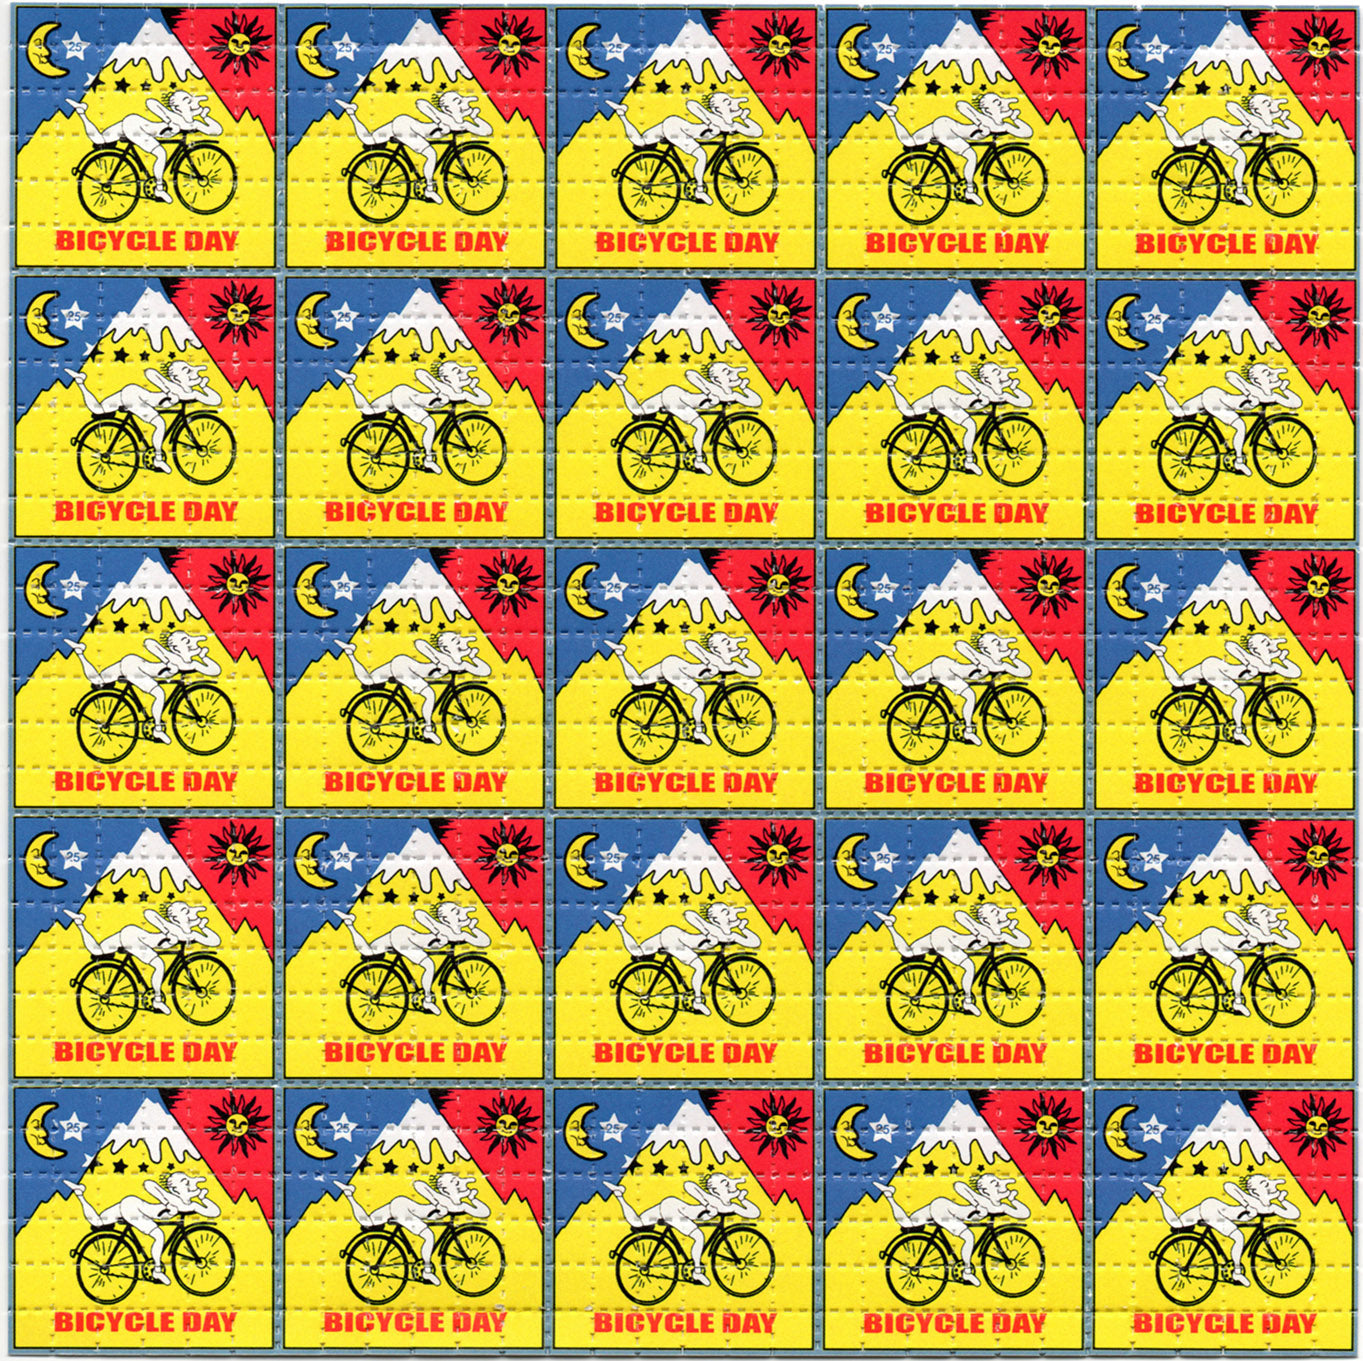 Red Bicycle Day X36 LSD blotter art print